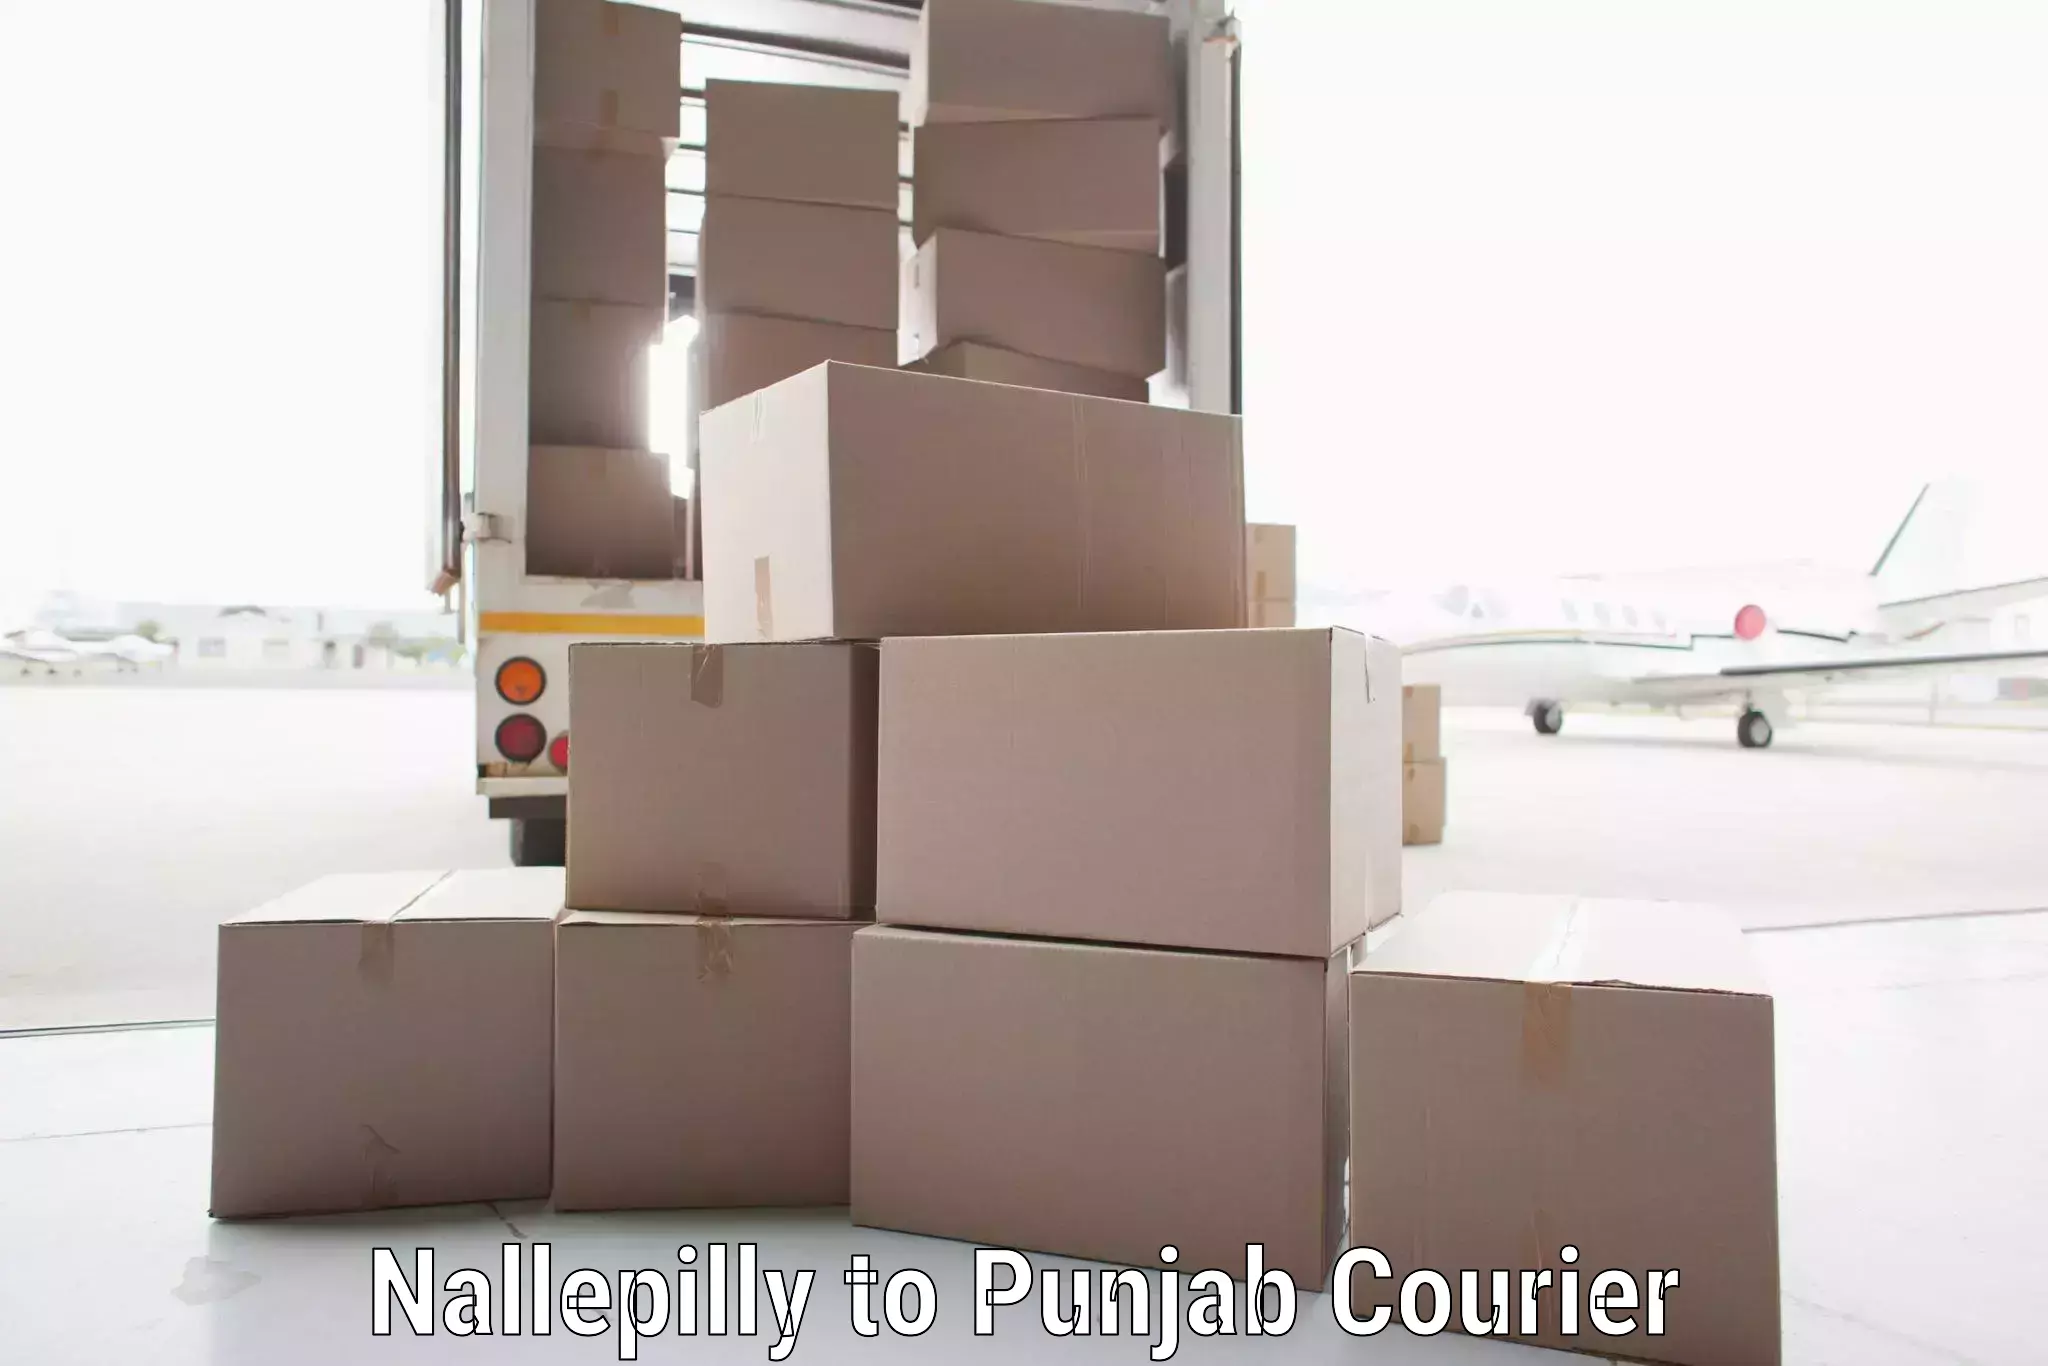 Courier service comparison Nallepilly to Dhilwan